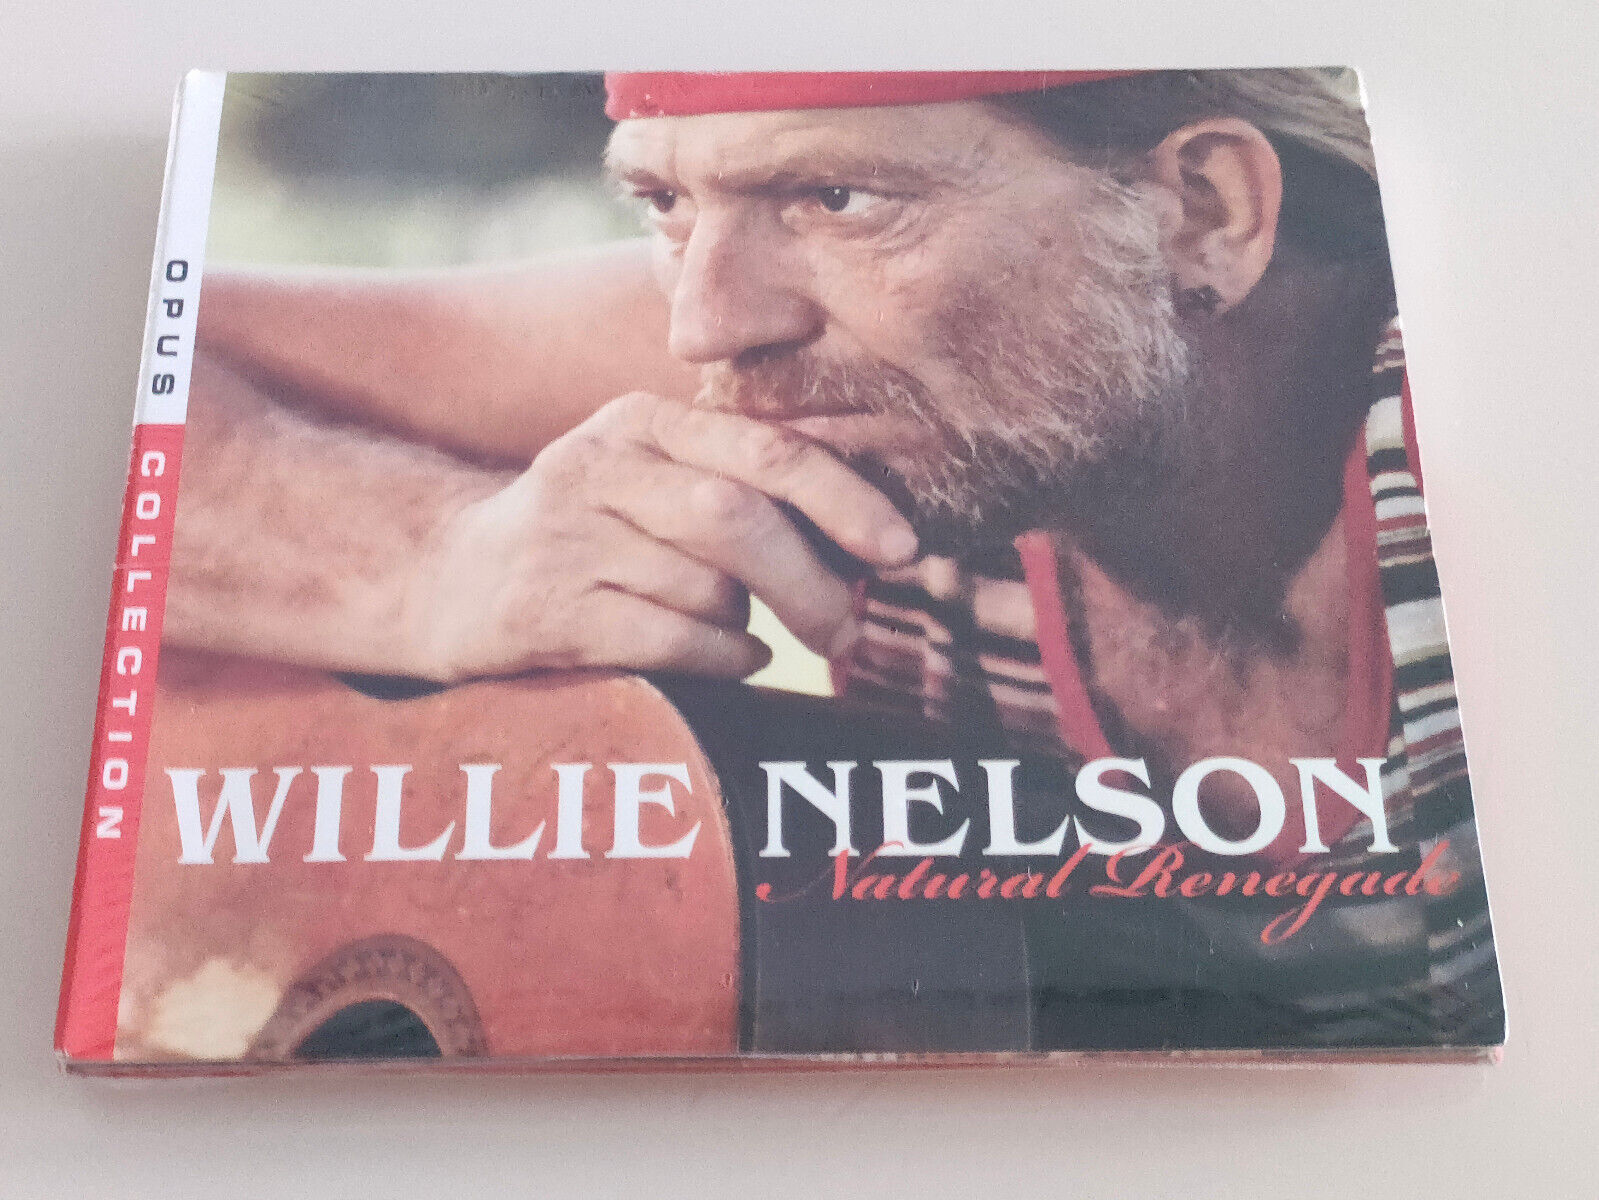 Natural Renegade by Willie Nelson (CD, 2008)